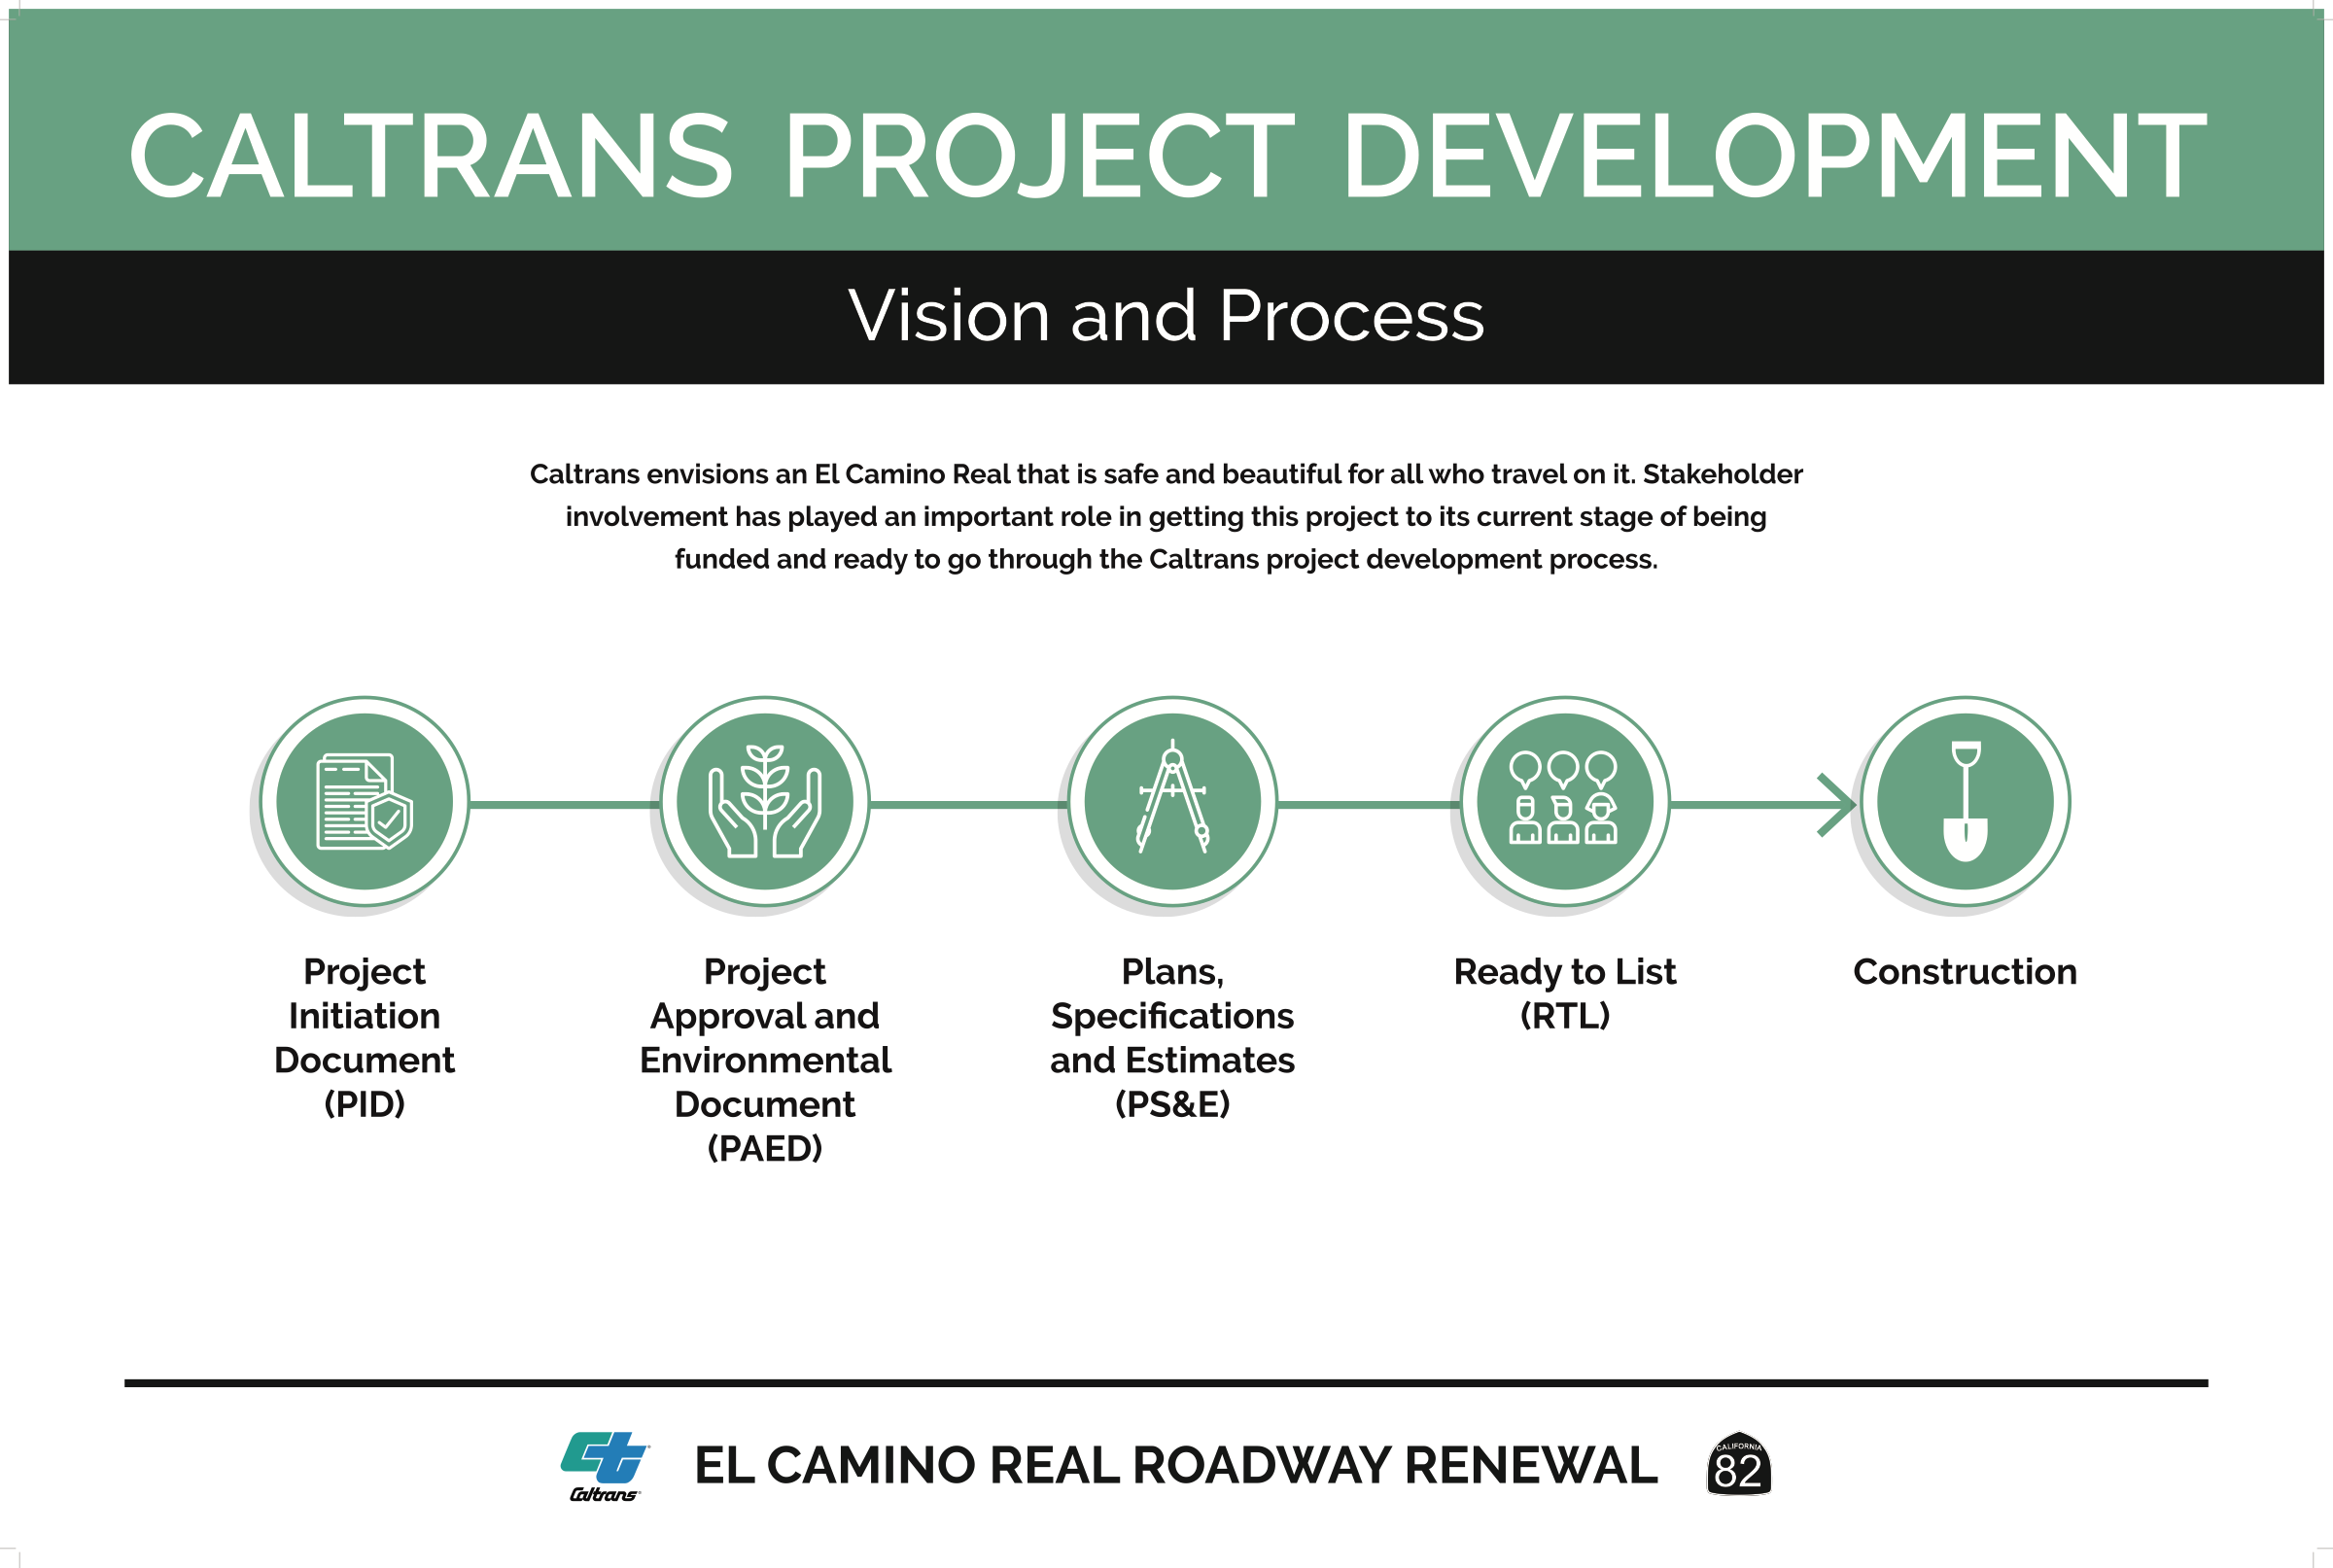 caltrans product development - vision and process